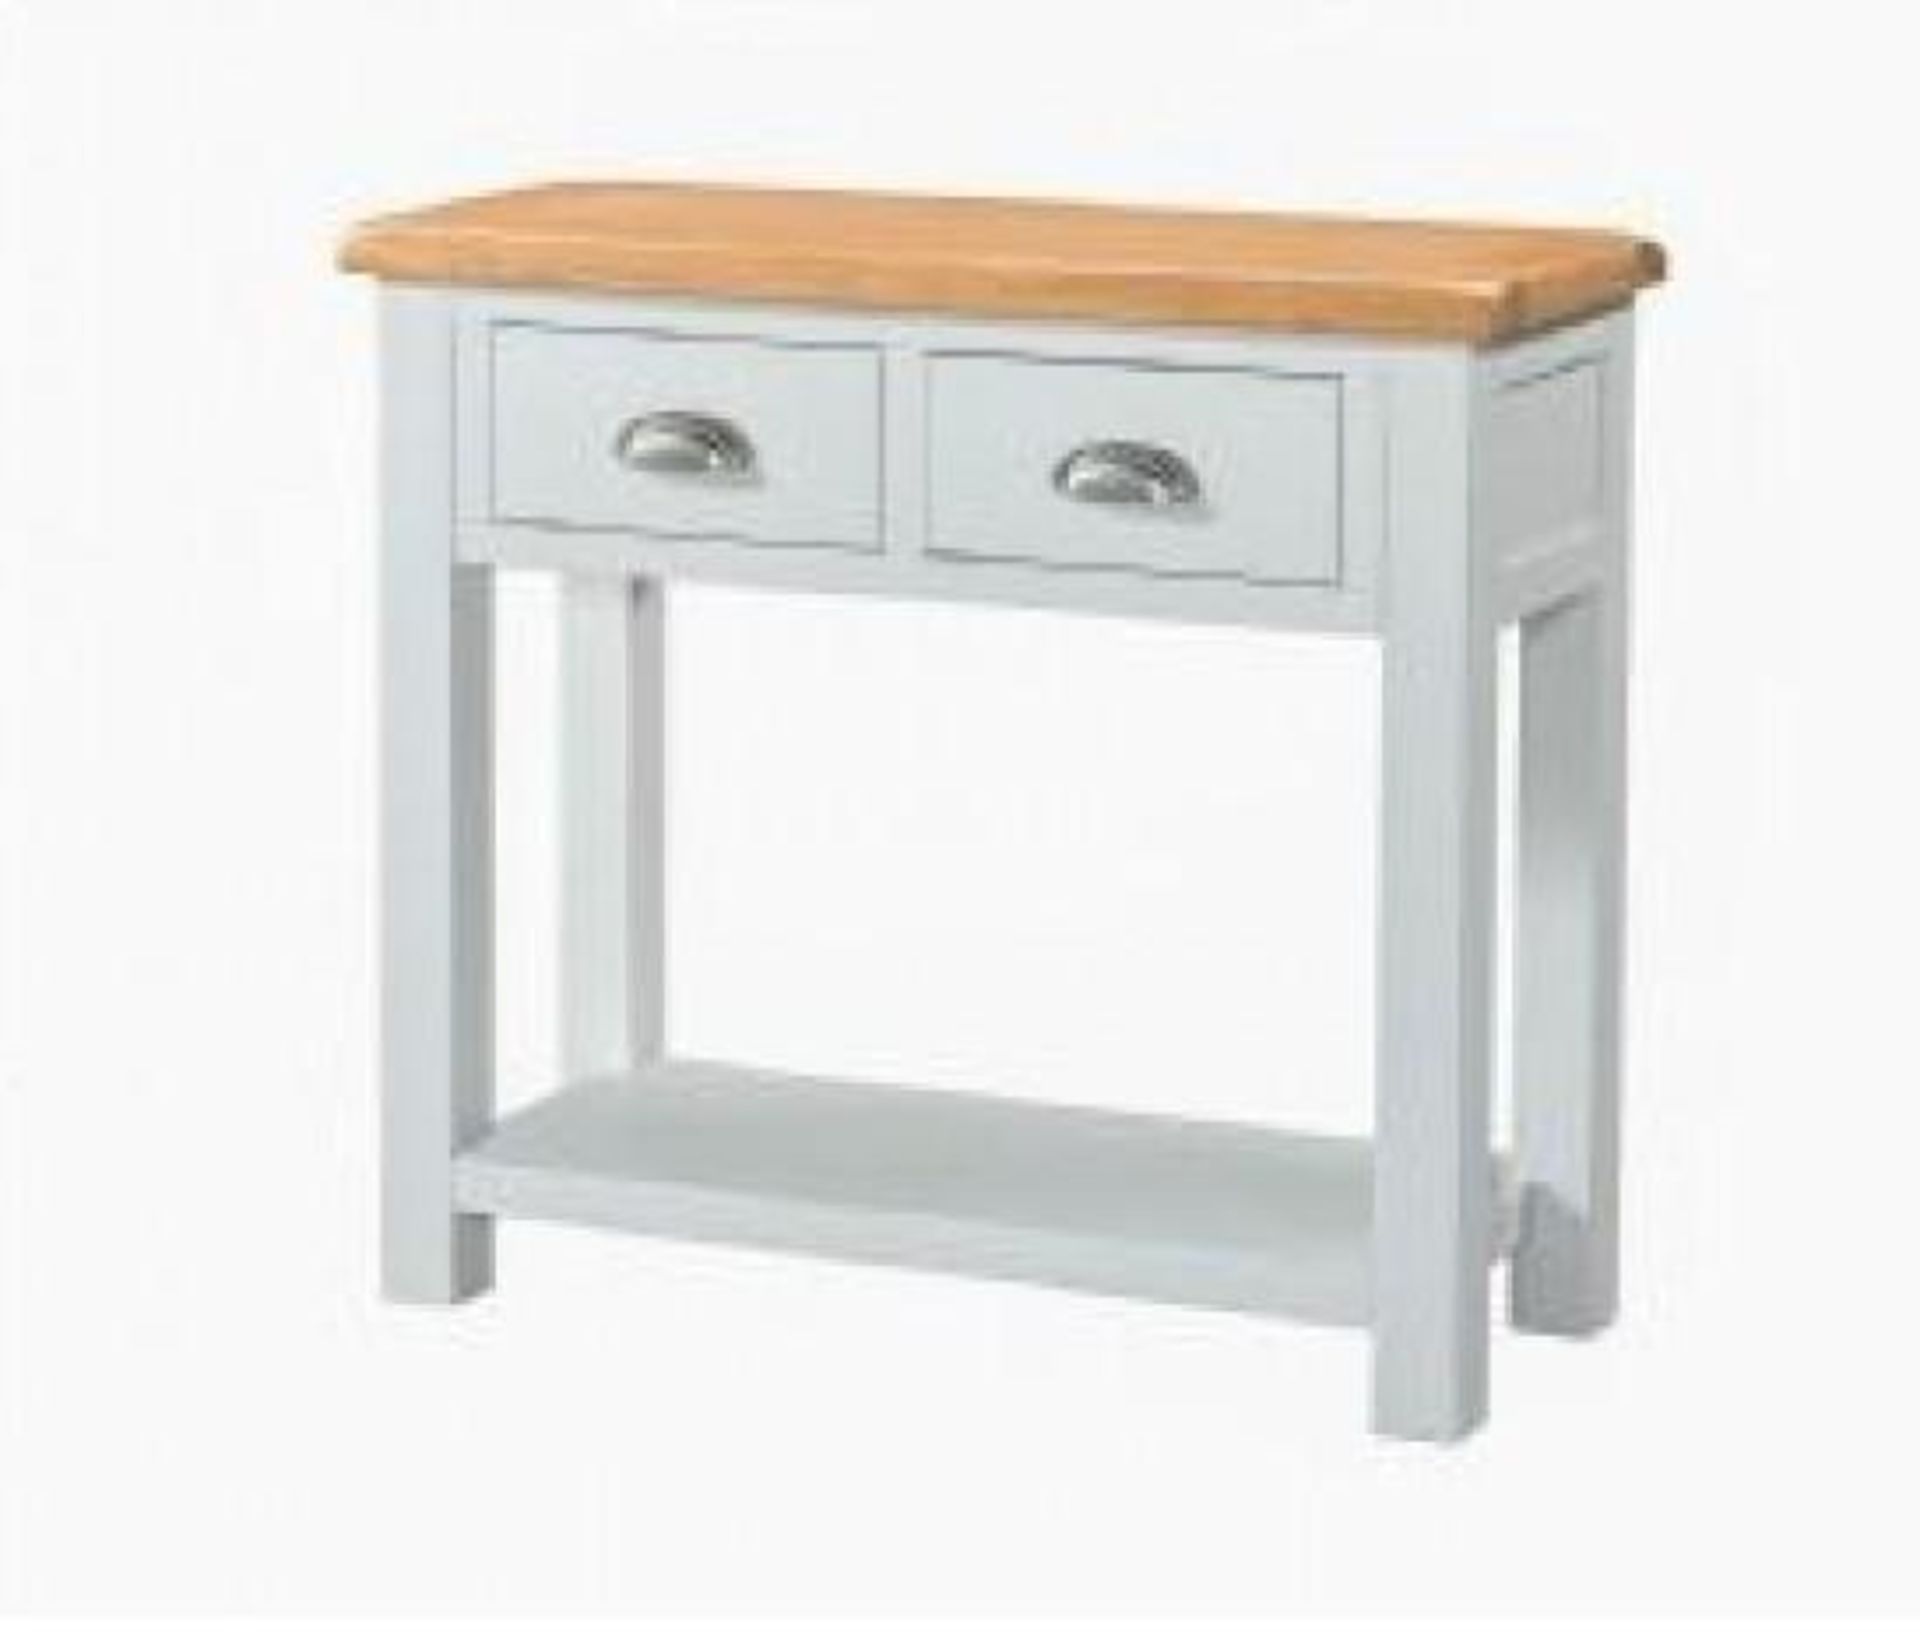 BRAND NEW & BOXED Clevedon 2 drawer console table